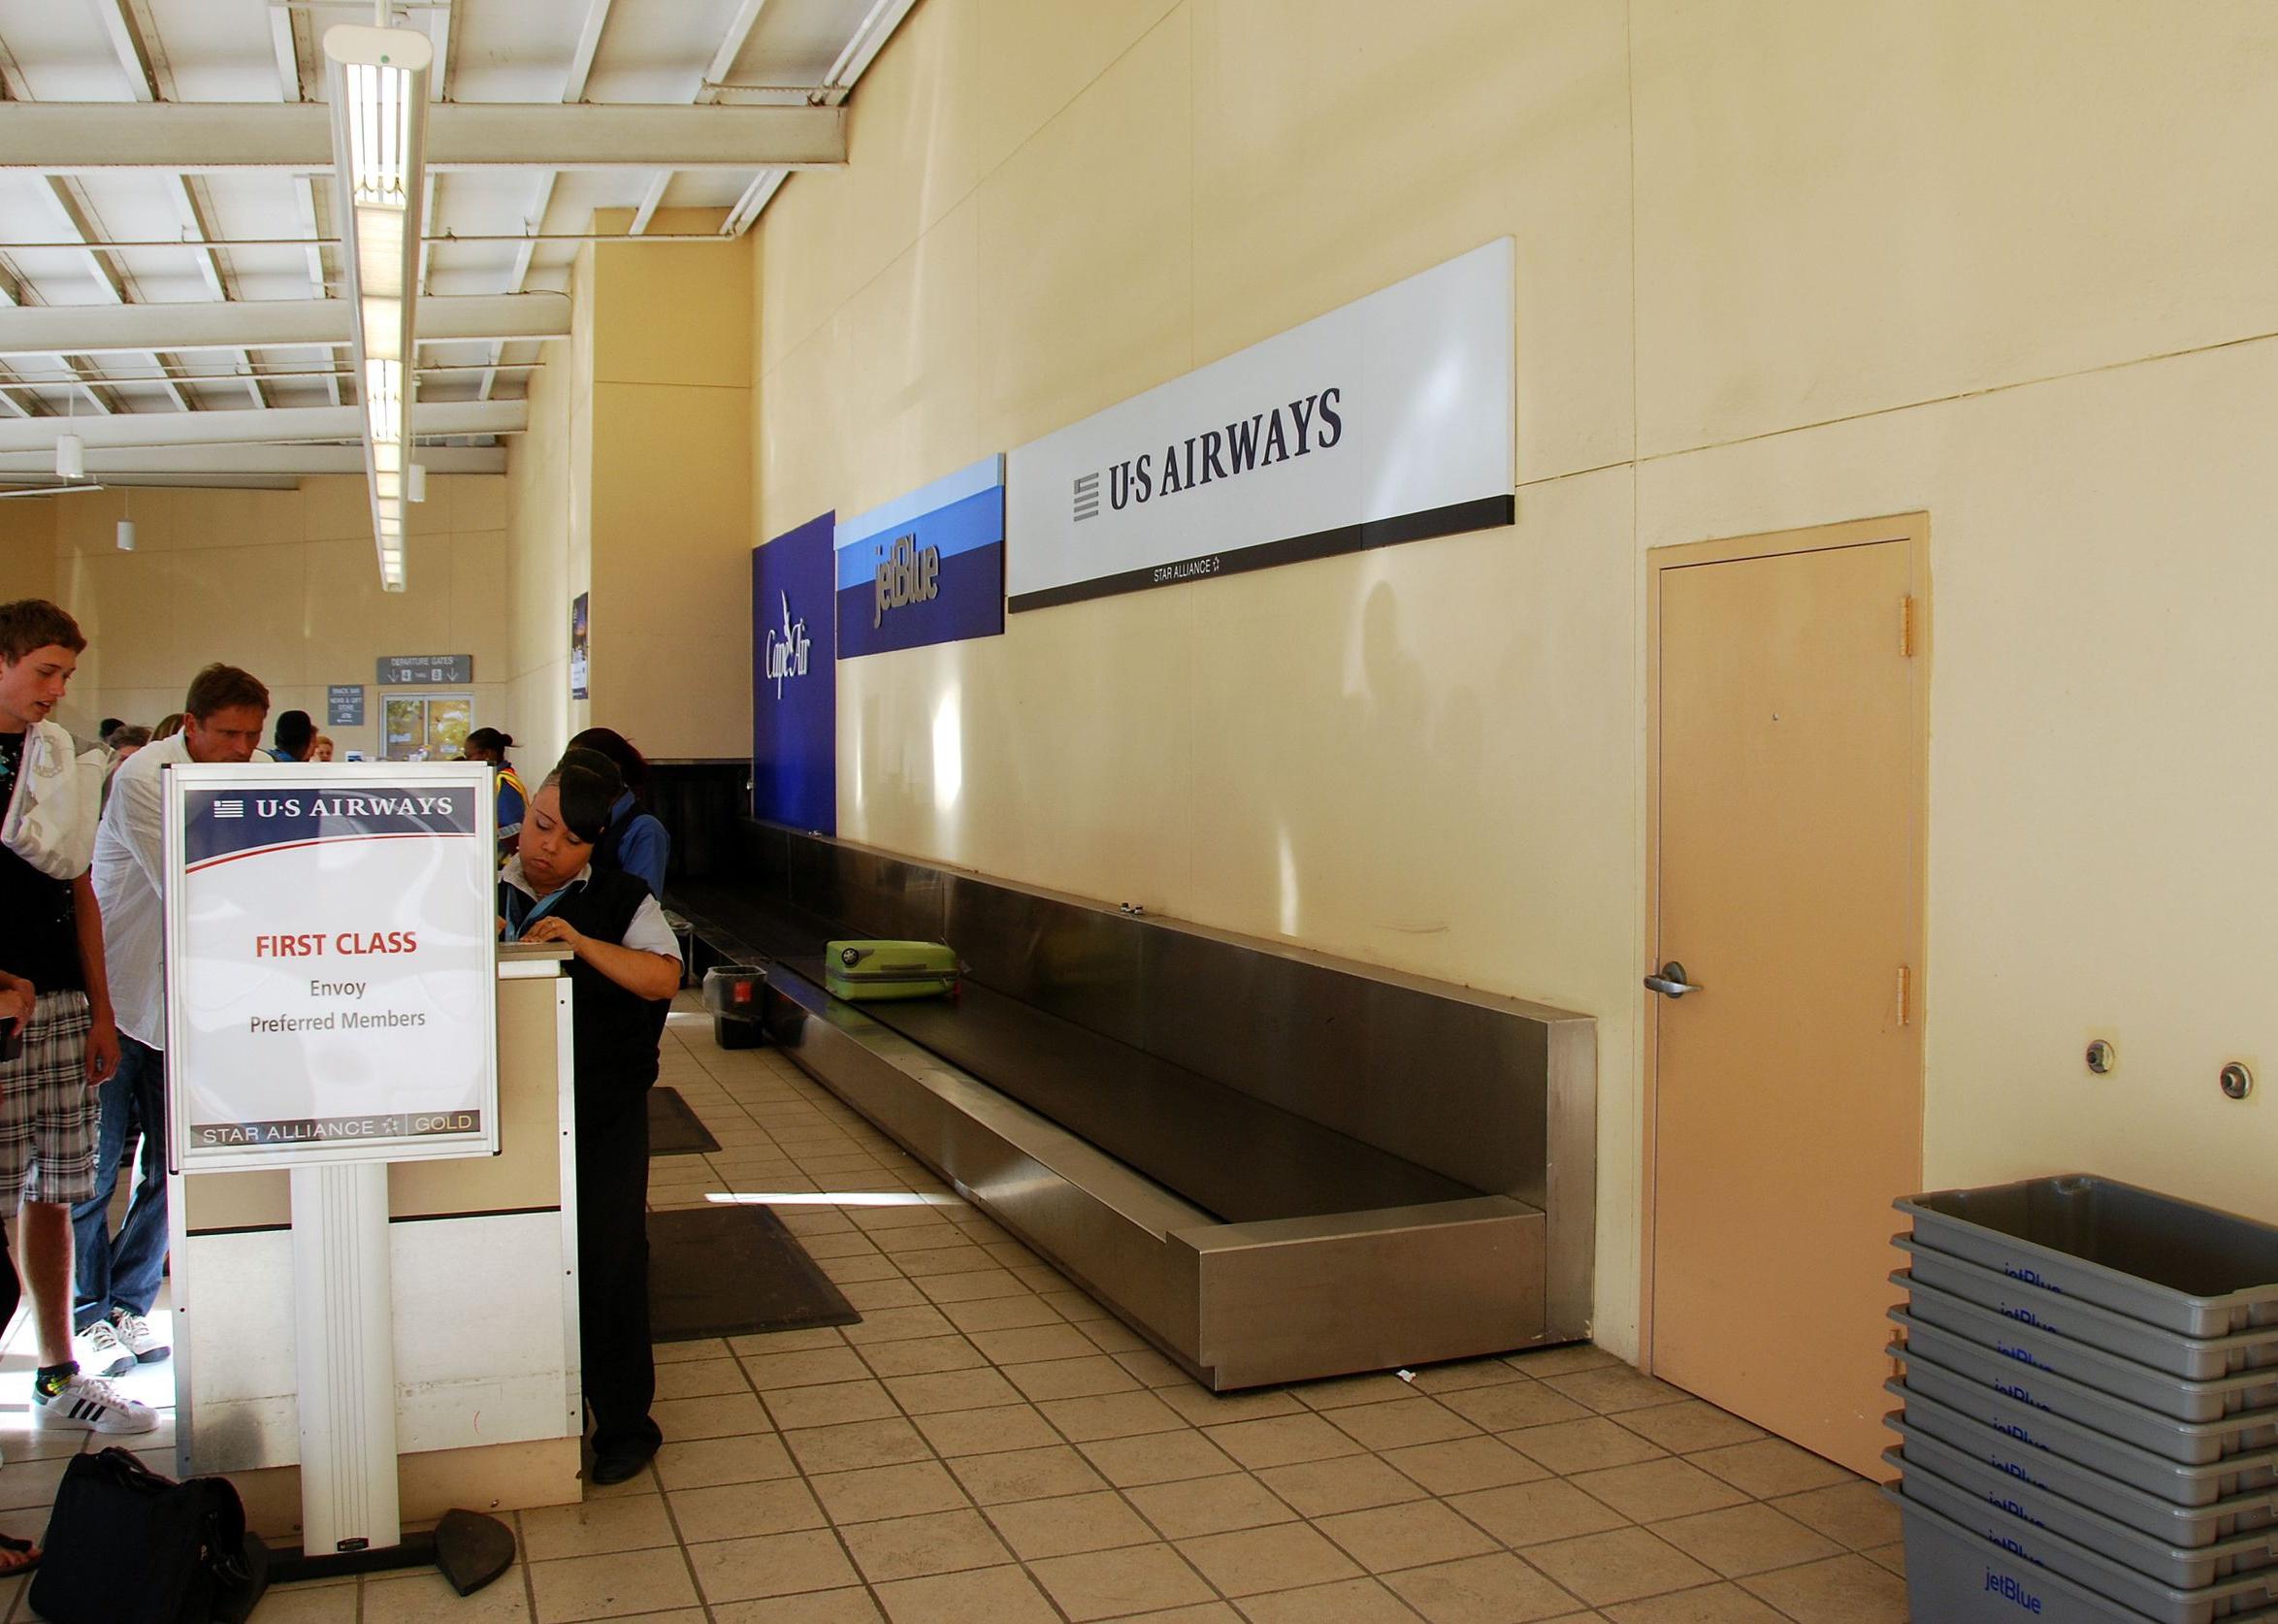 People standing at a first class airport kiosk in a small airport.